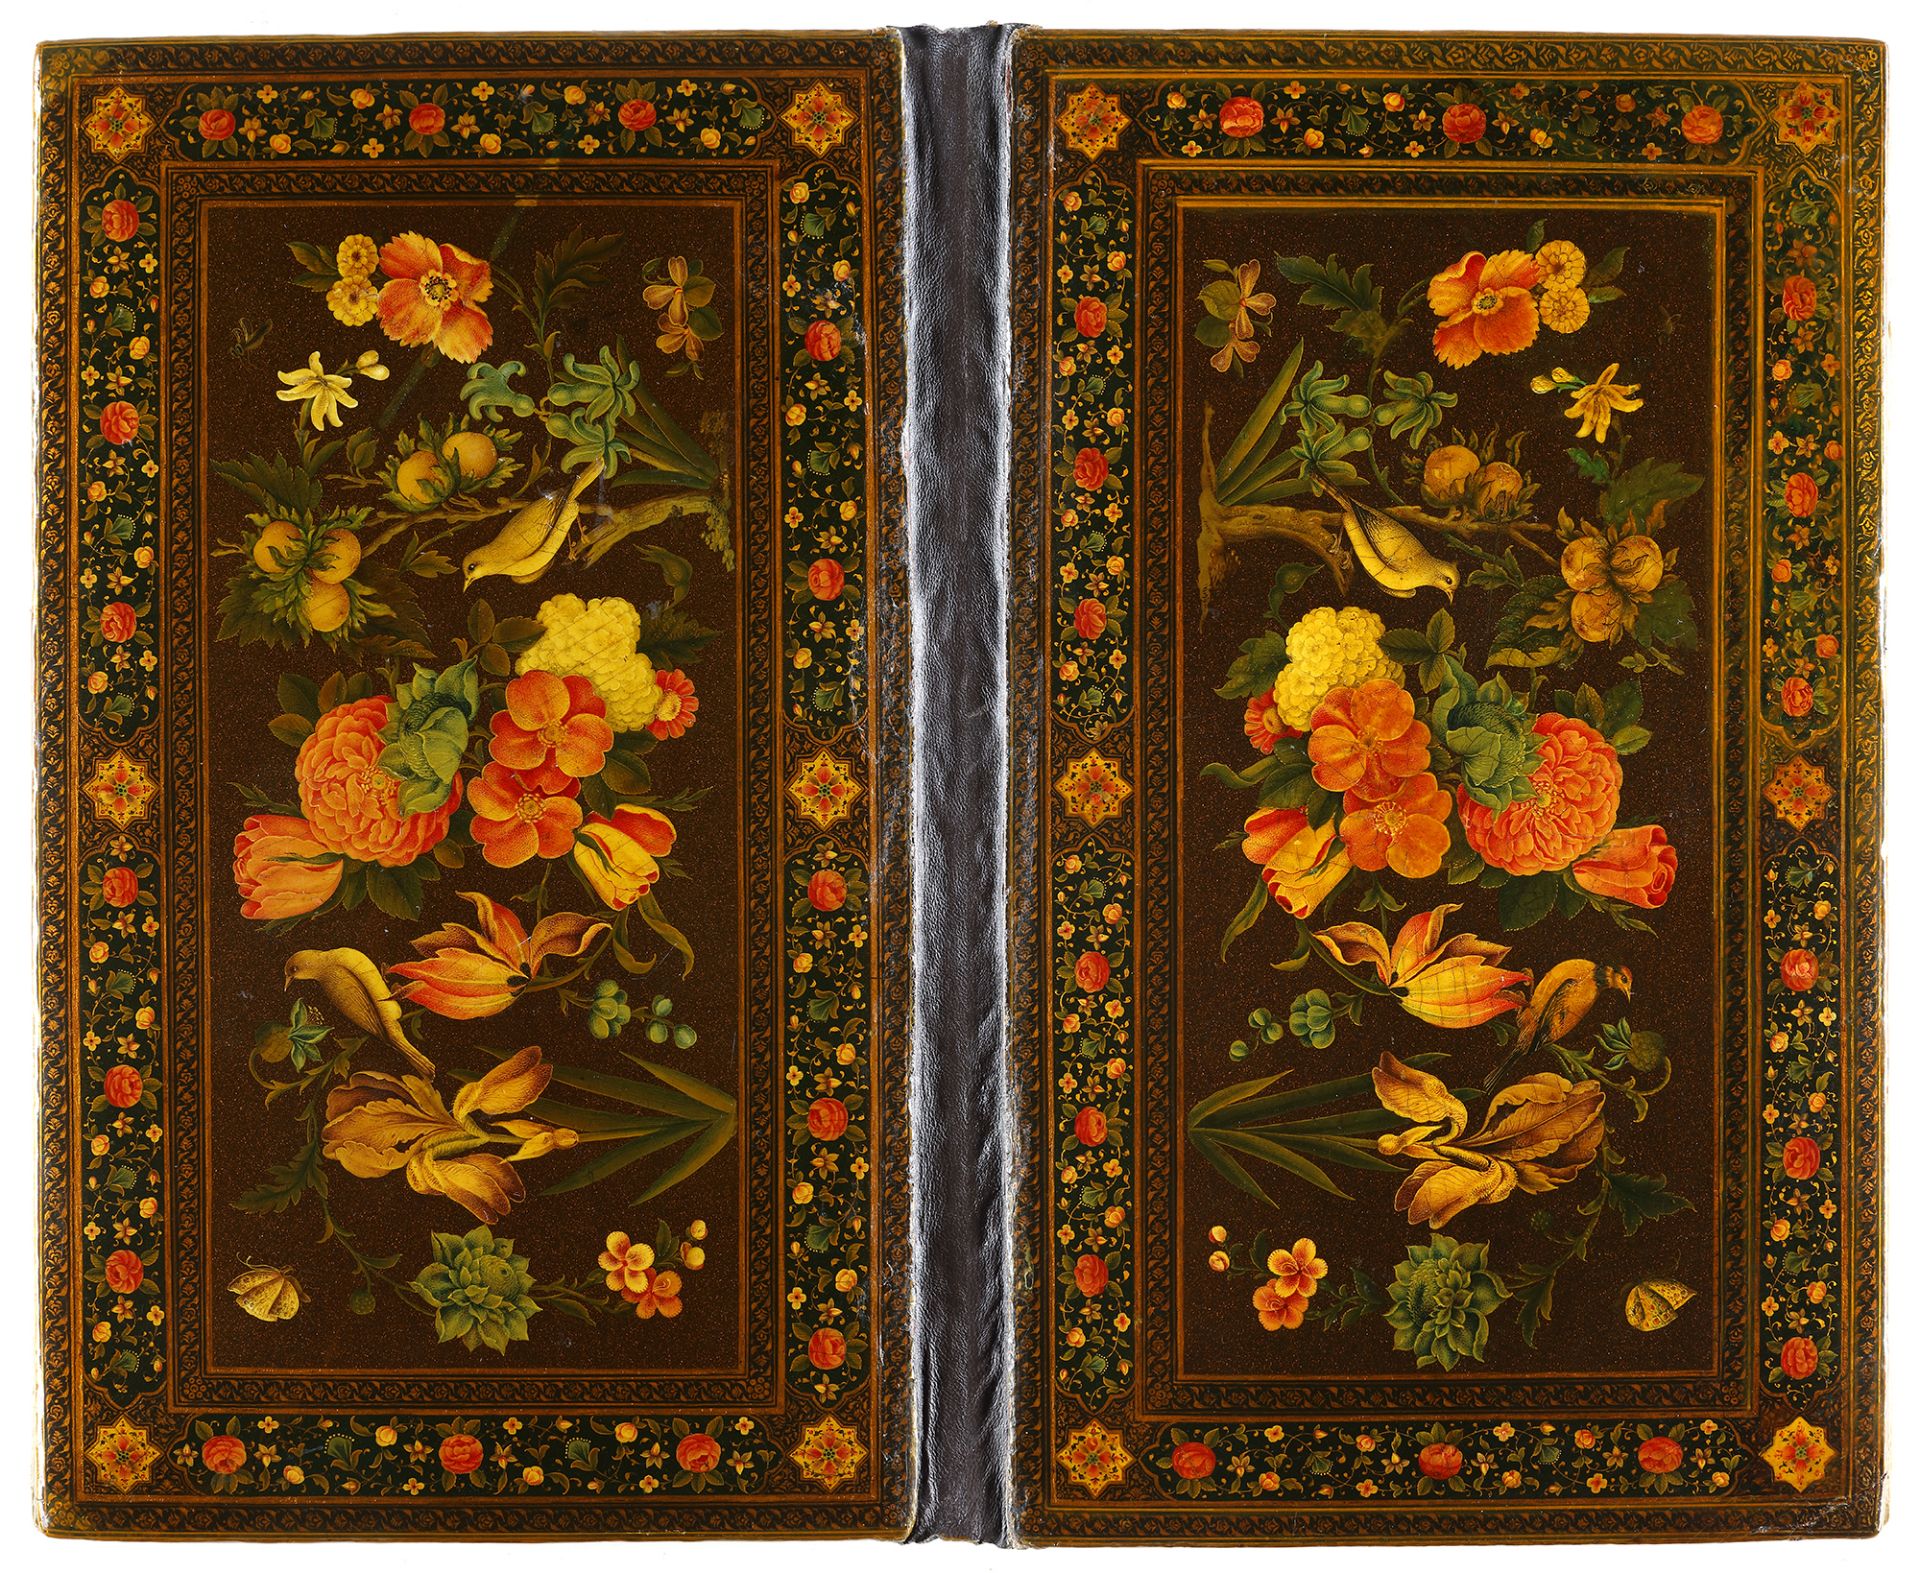 AN ILLUMINATED QURAN, PERSIA, LATE 19TH-EARLY 20TH CENTURY - Image 7 of 27